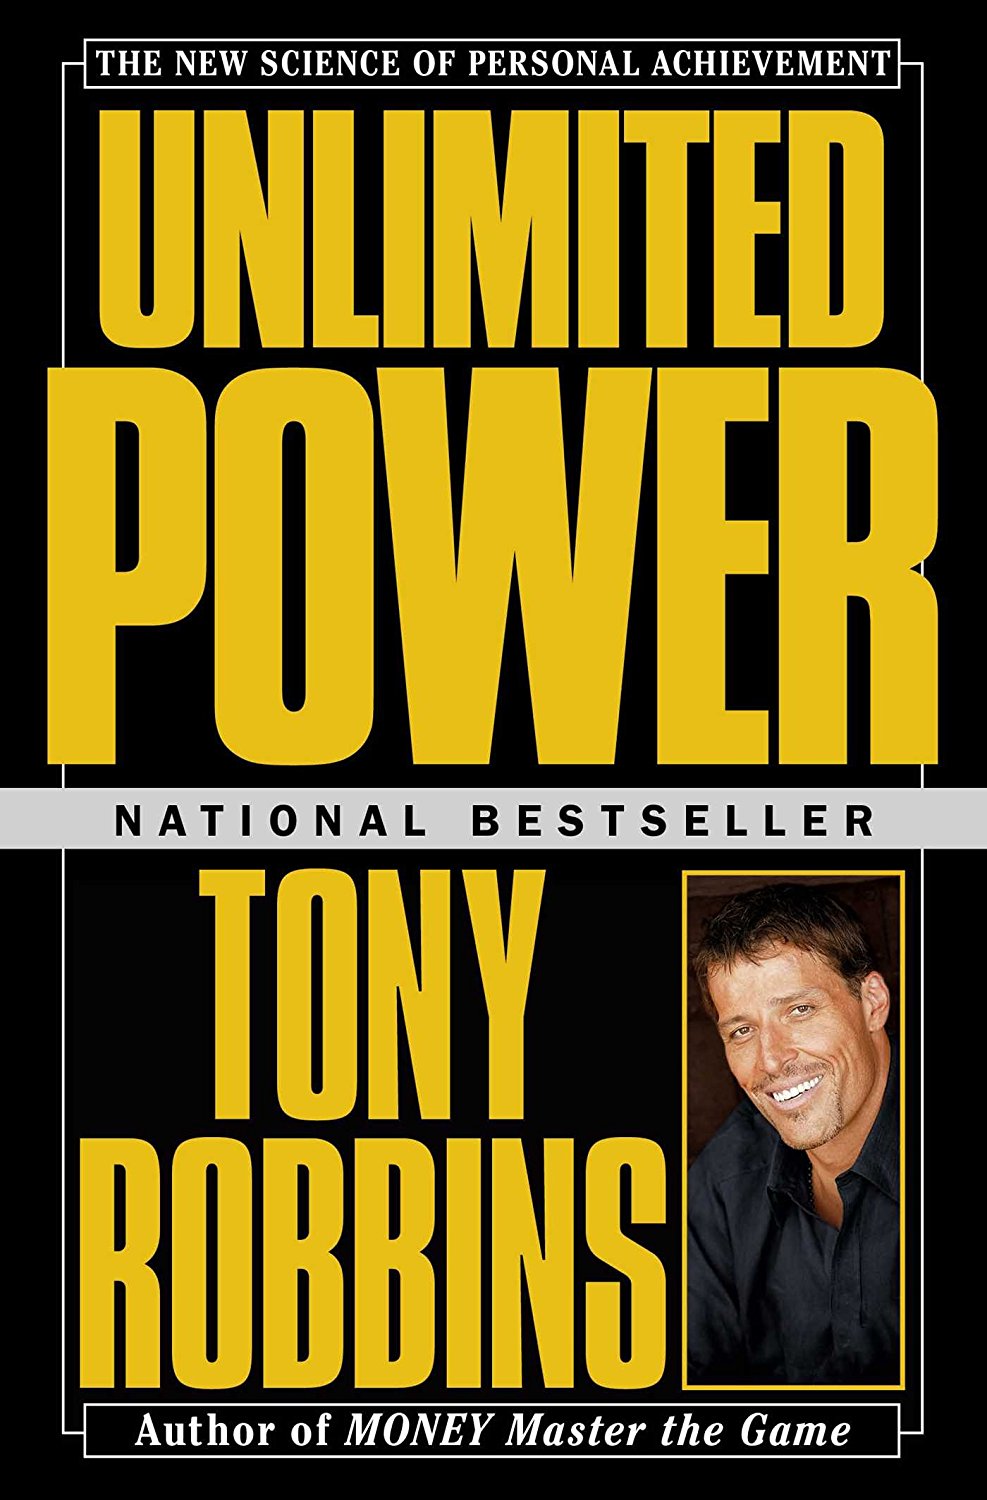 A good Book To read:   Unlimited Power- The New Science of Personal Achievement